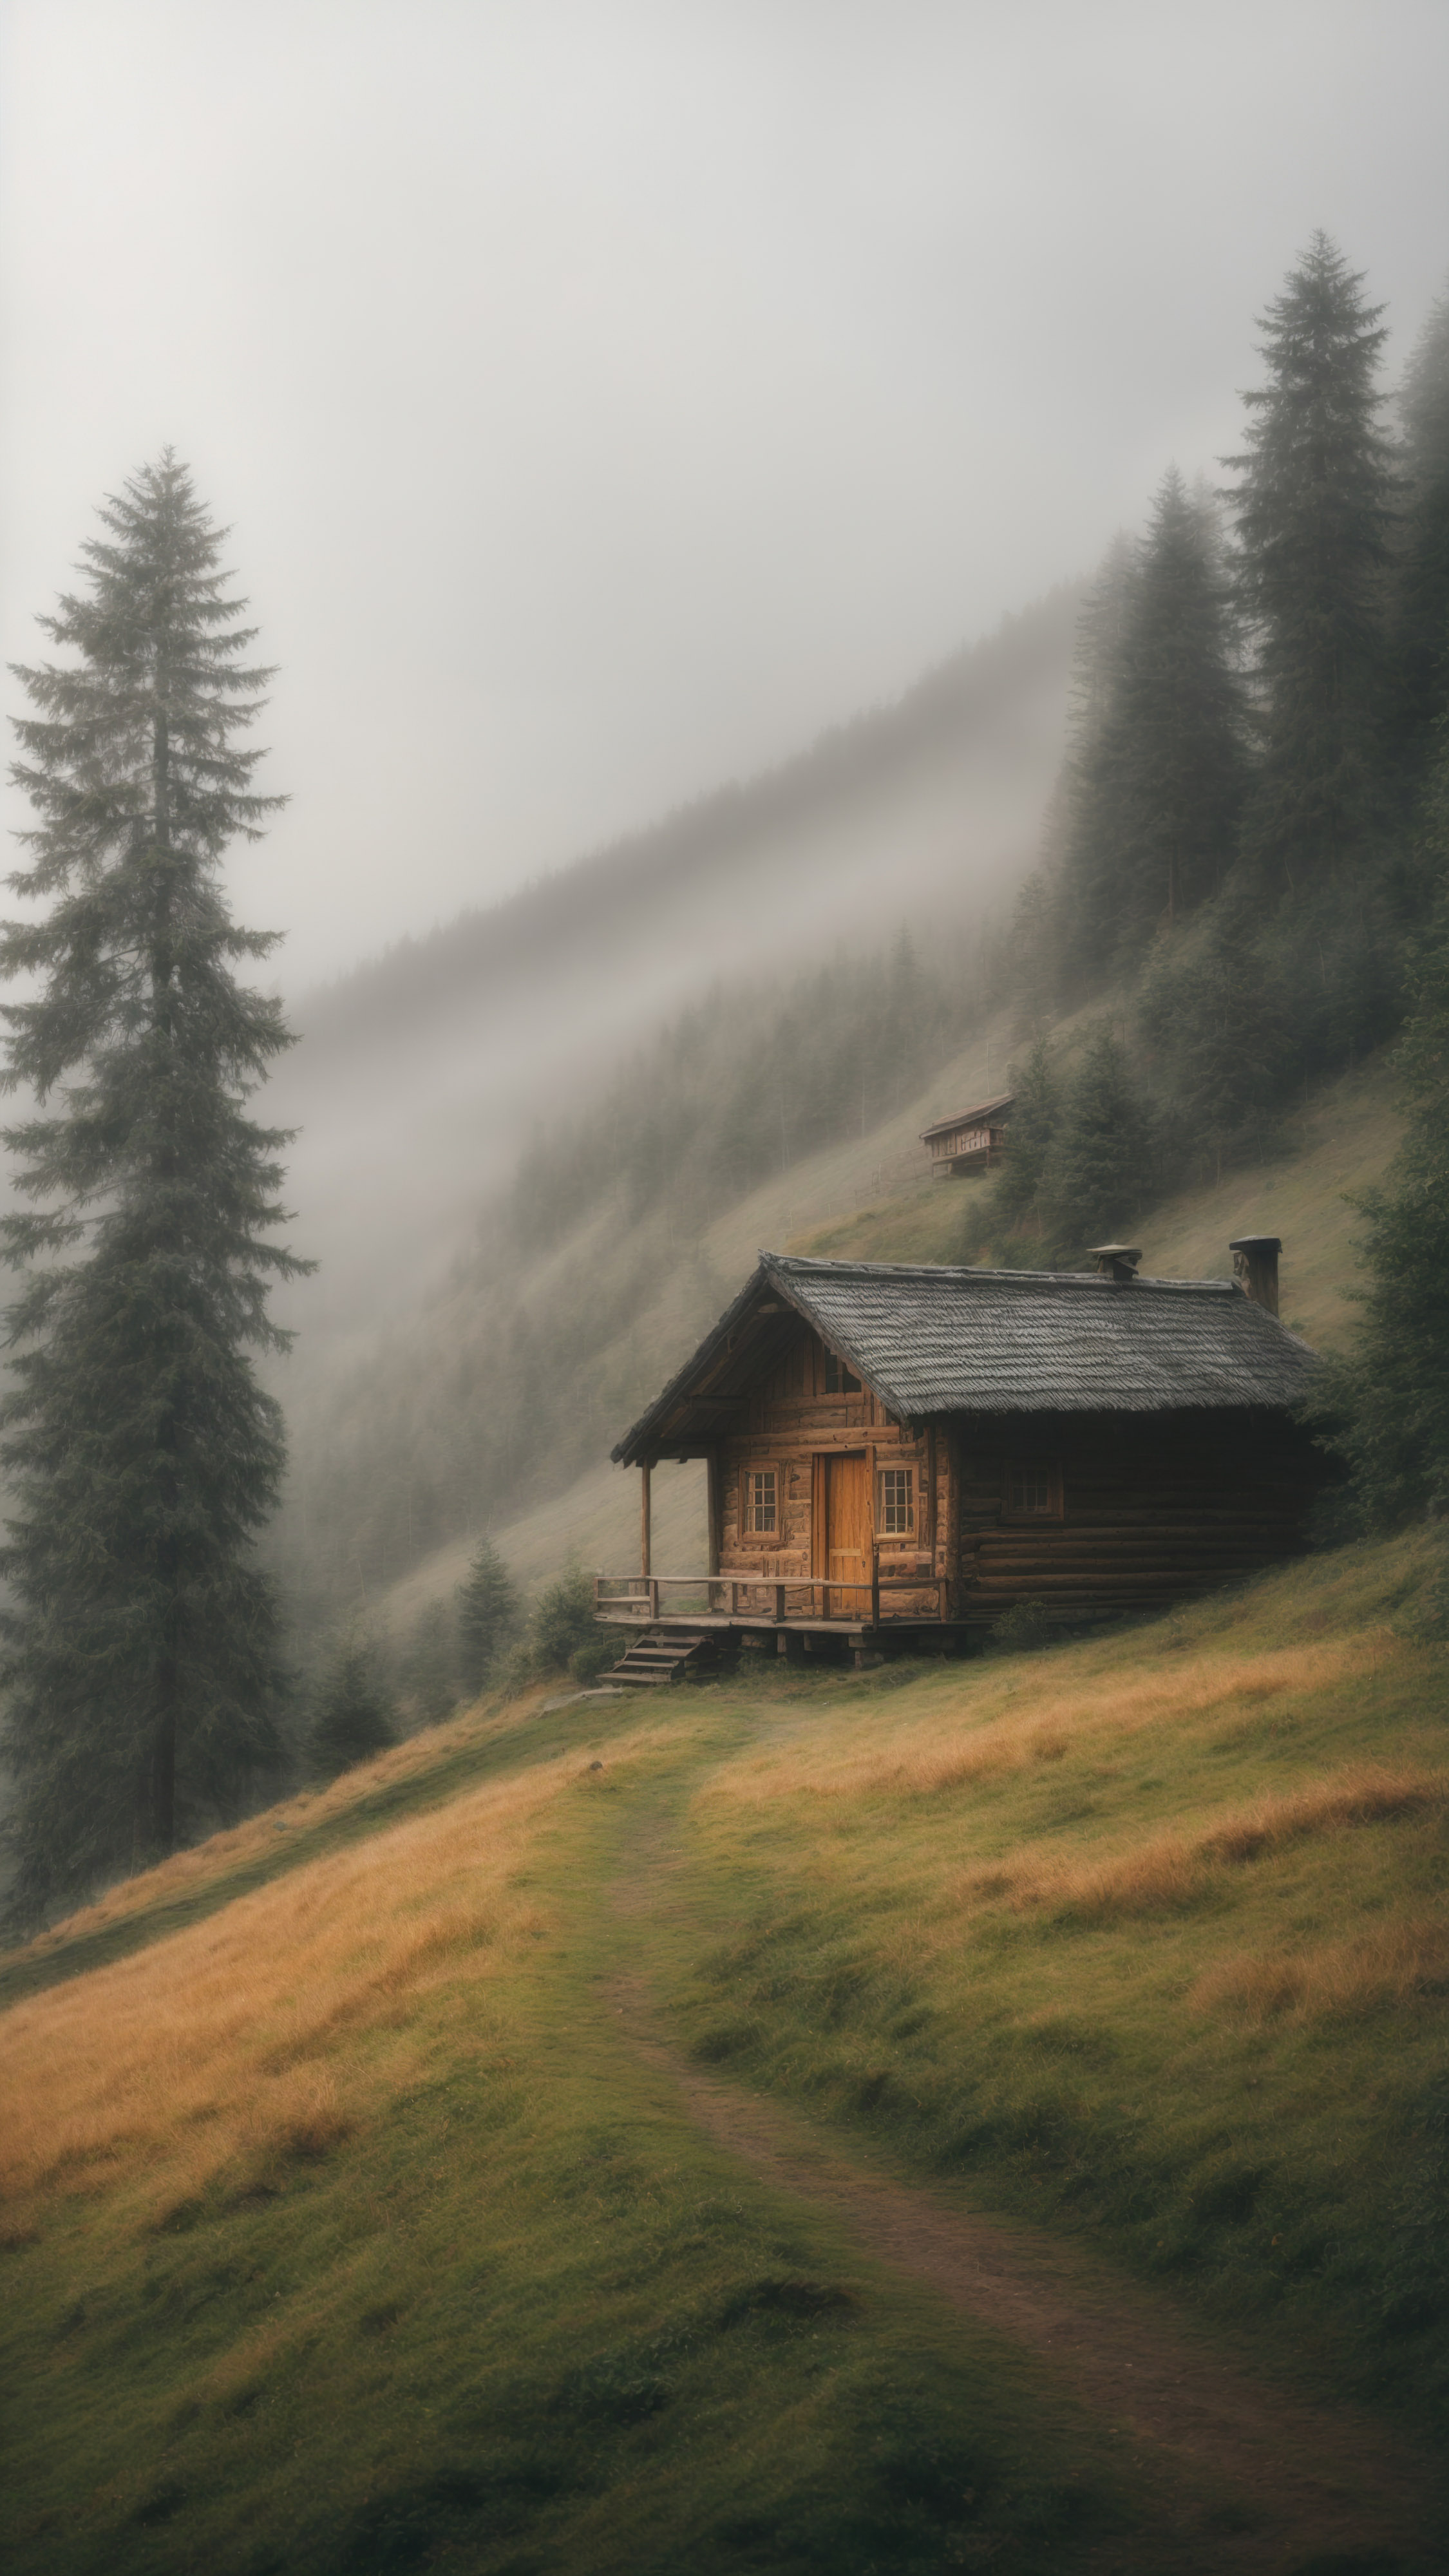 Get a glimpse of a foggy morning in the mountains, complete with a misty forest and a wooden hut, with our mountain view wallpaper for iPhone.